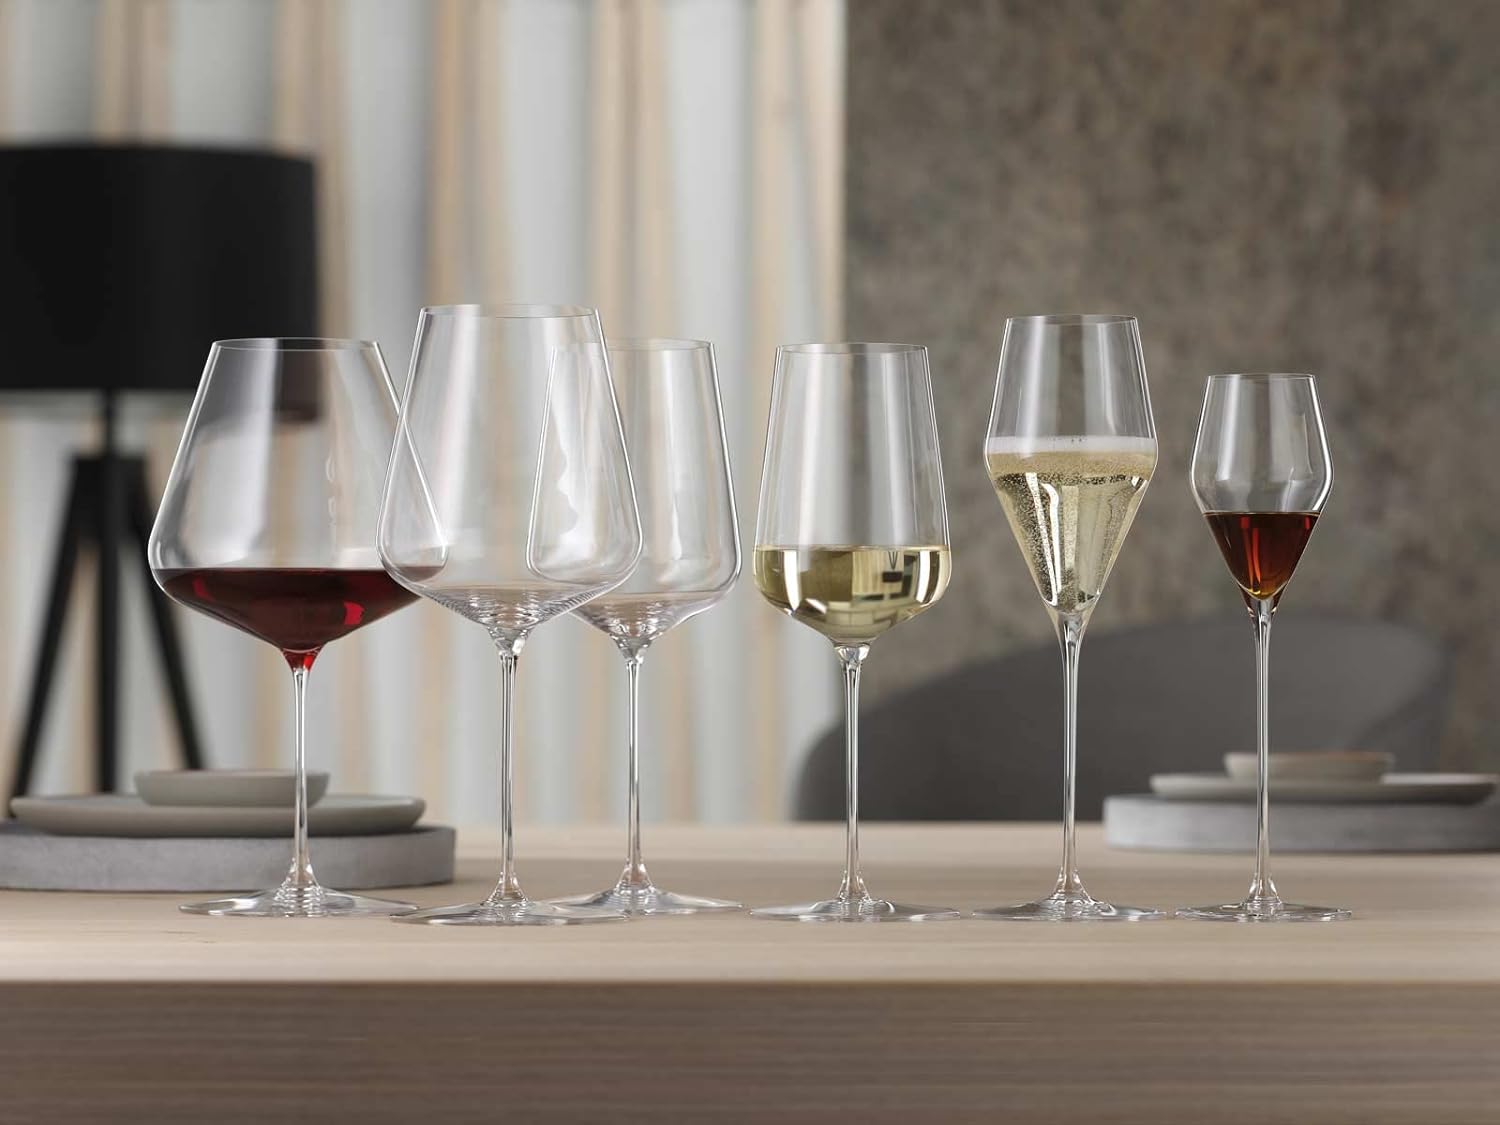 https://www.wineandmore.com/wp-content/uploads/2024/01/Best-Dessert-Wine-Glasses-and-Port-Glasses-Tested-and-Reviewed-by-Experts-Spiegelau.jpg